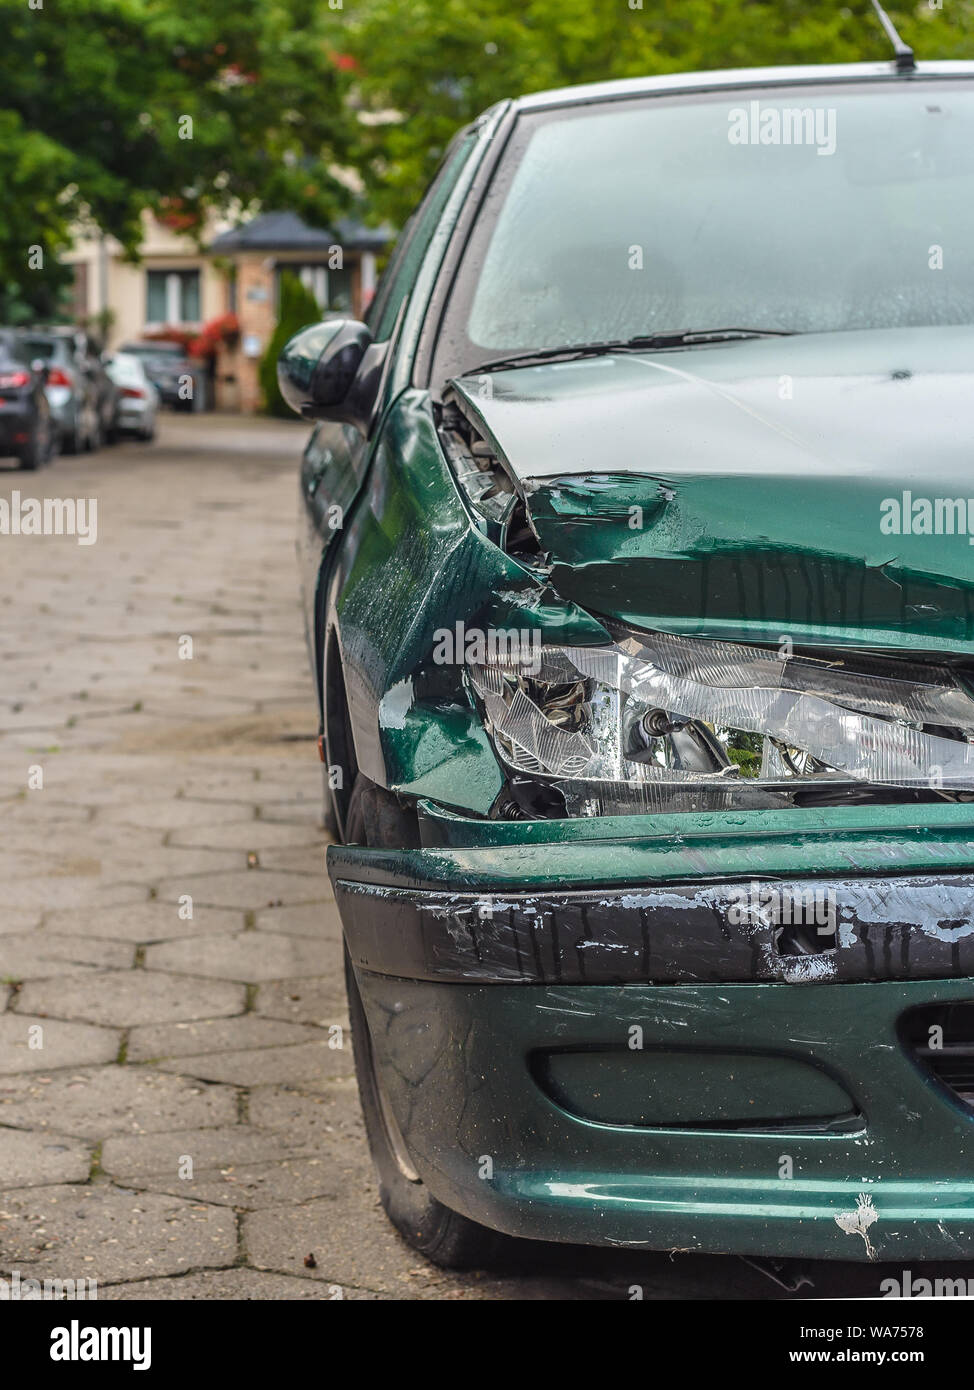 Car crash or accident. Front fender and light damage and scratchs on bumper. Broken vehicle detail or close up. Stock Photo